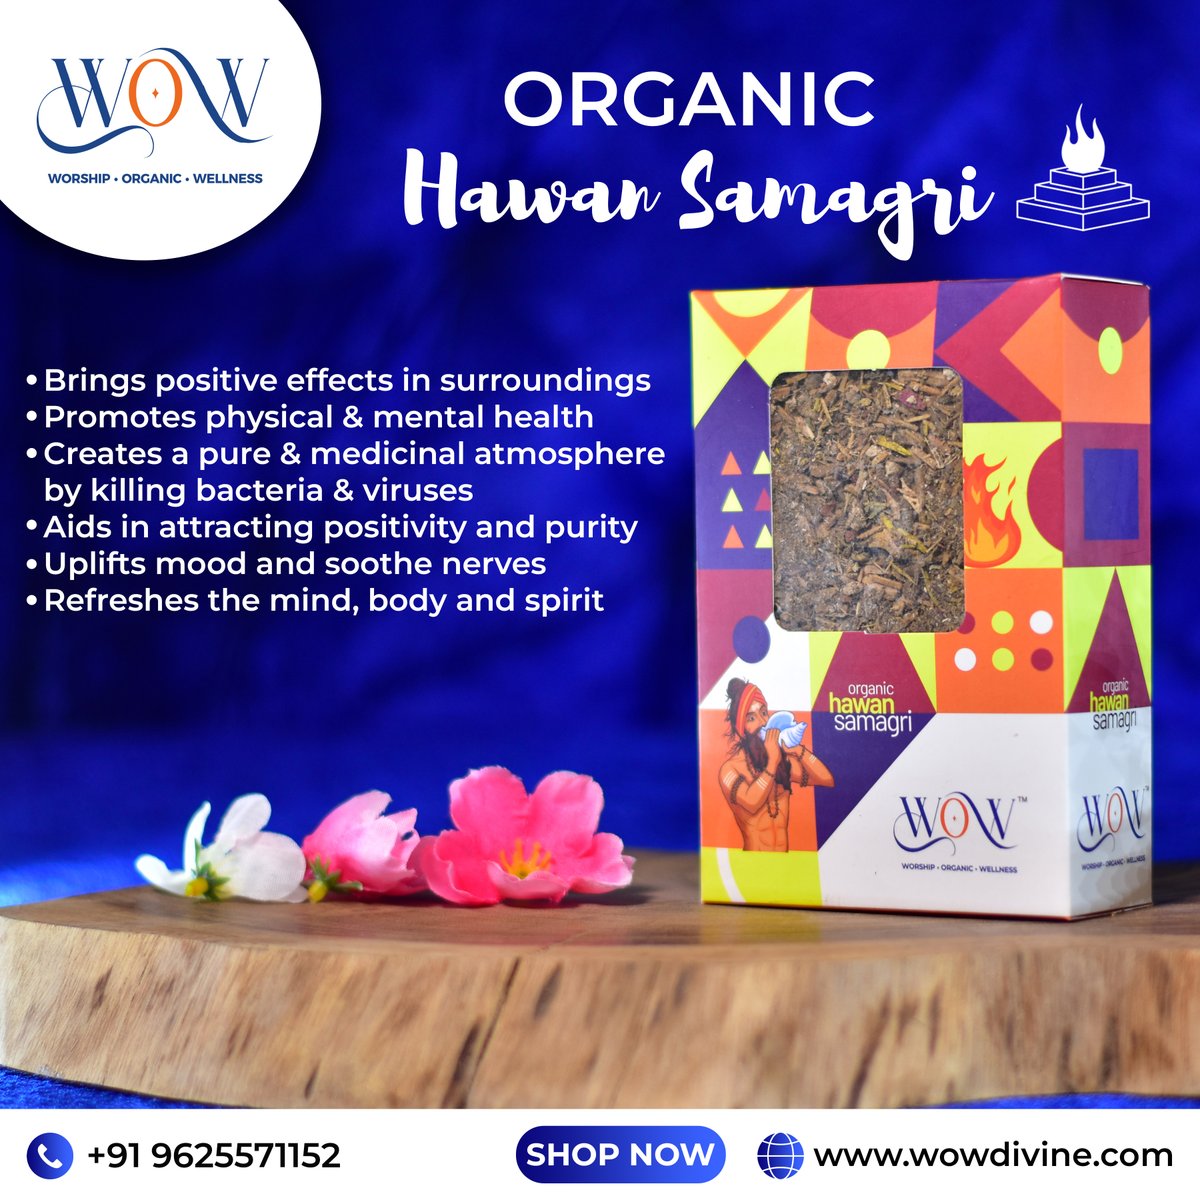 Infuse positivity, purity and divinity in your surroundings with Organic Hawan Samagri.

Shop Now : wowdivine.com/product-catego…

#pujasamagri #spiritualproducts #divinity #hawansamagri #wowdivine #wowdivineshop